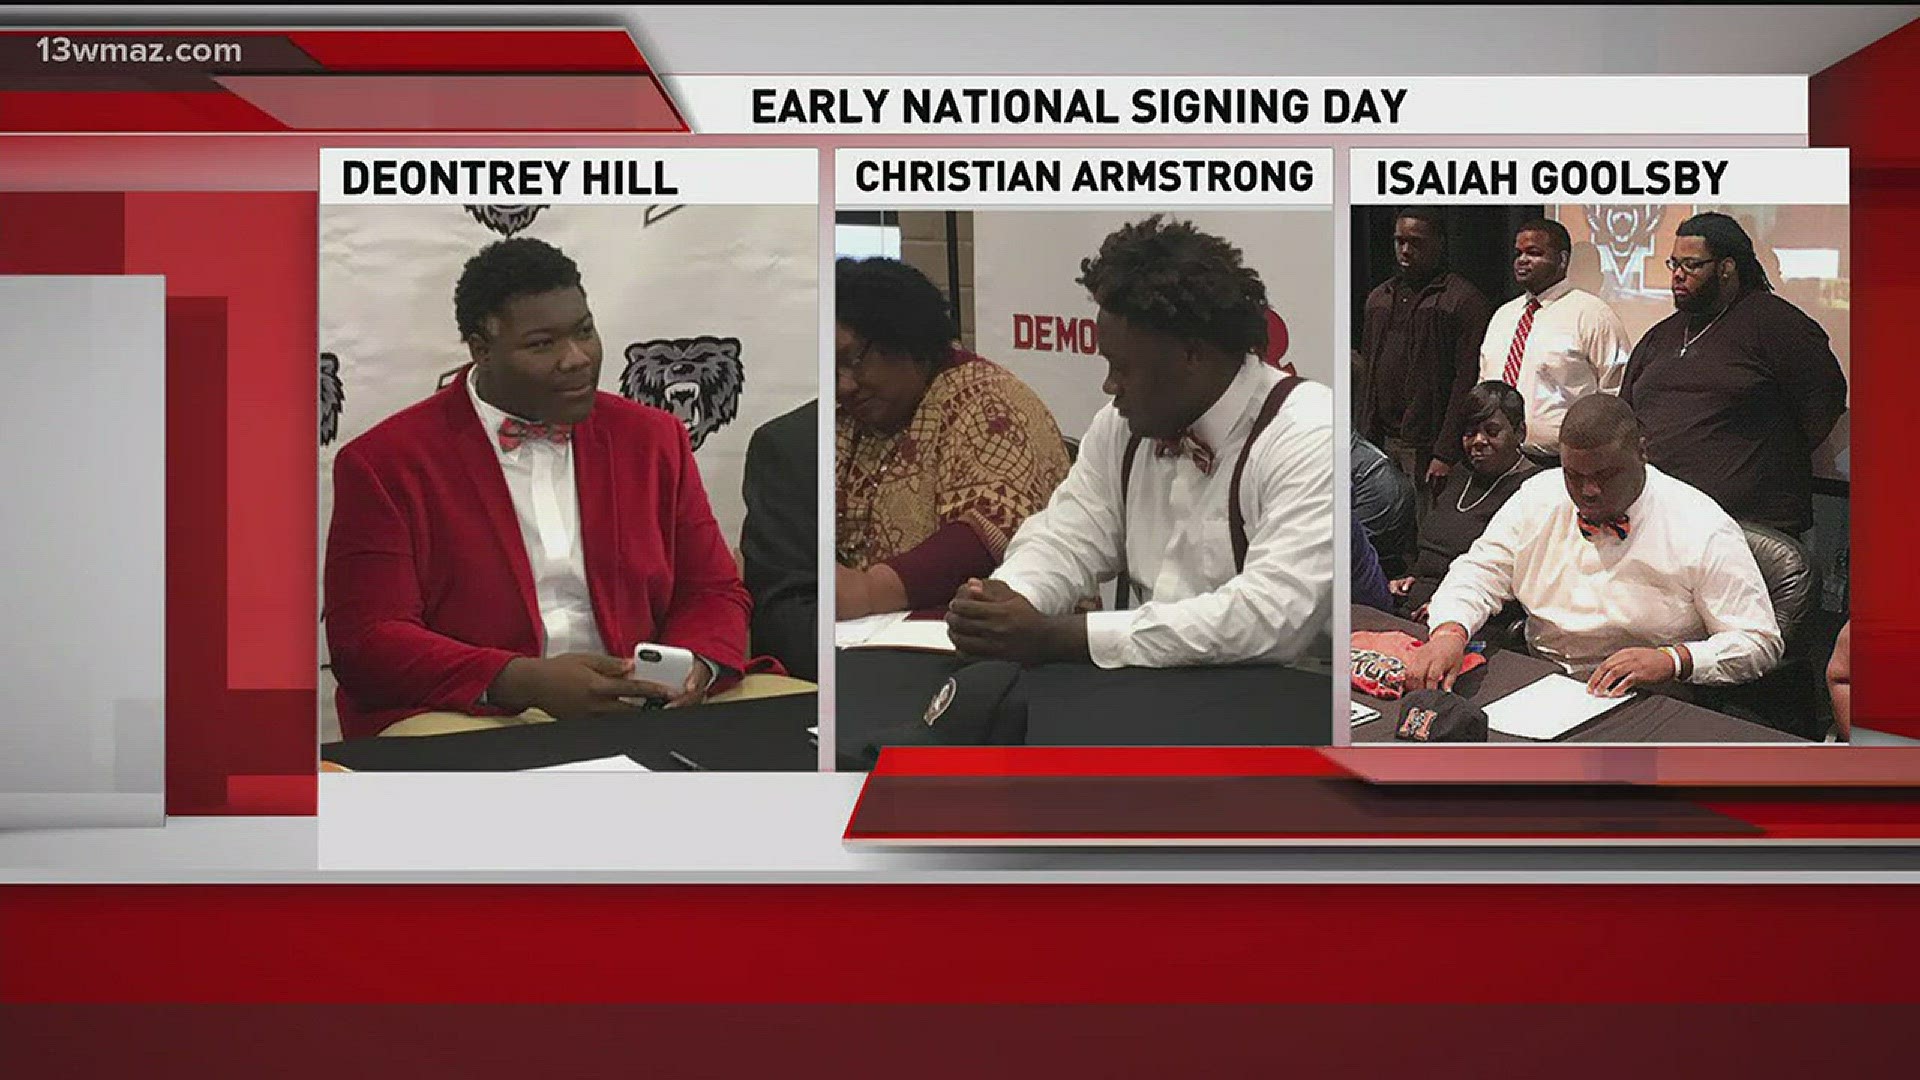 Early National Signing Day highlights